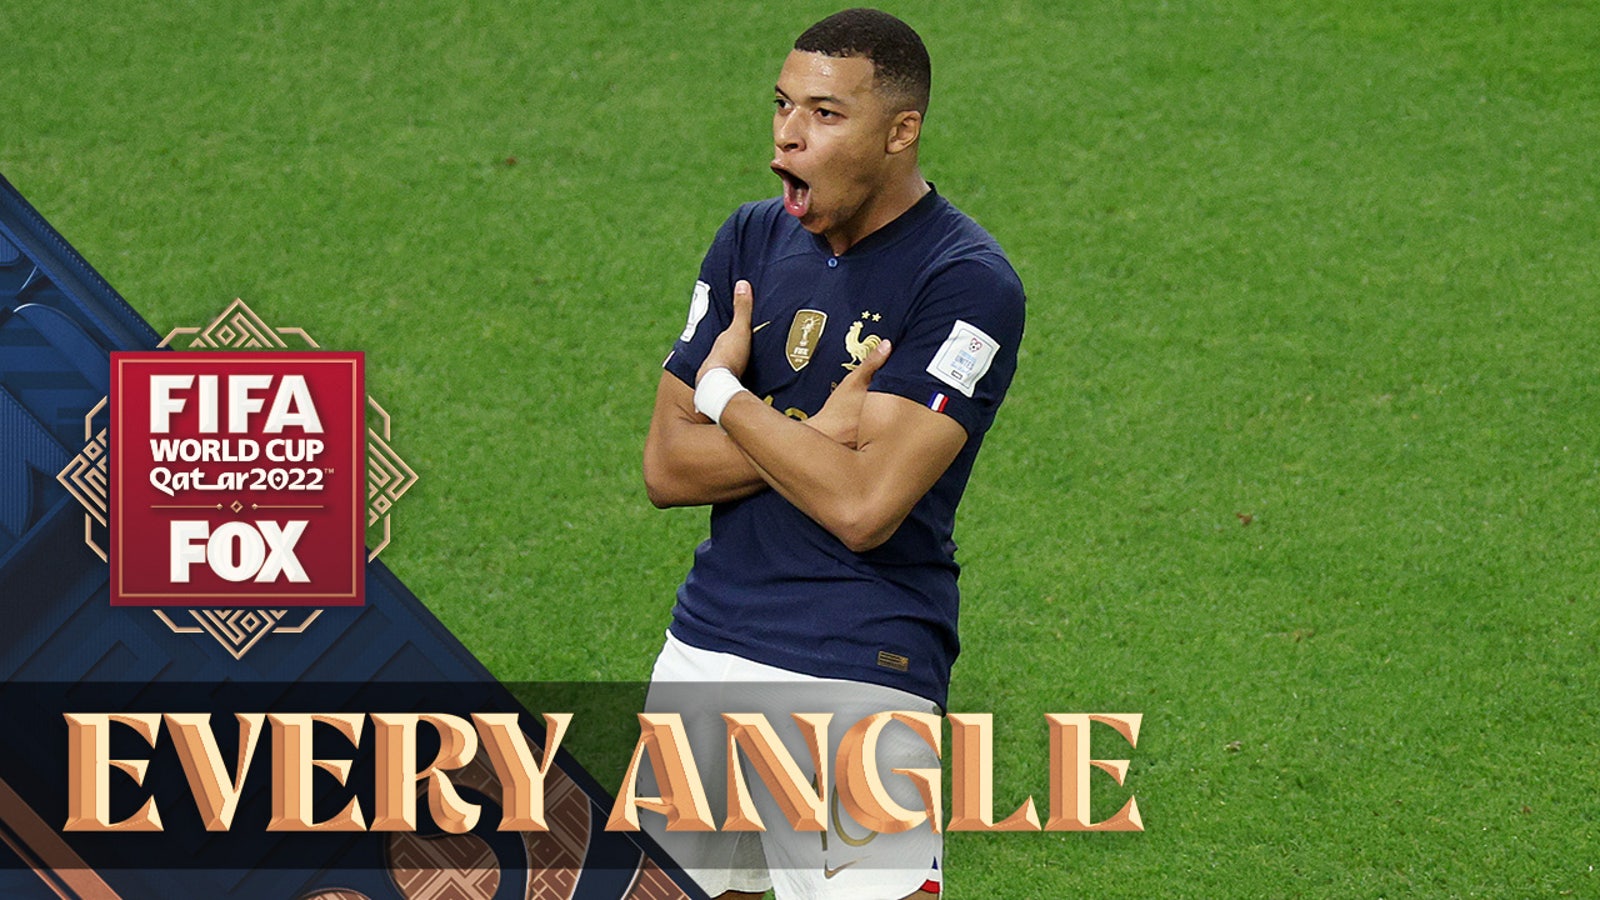 Kylian Mbappé goes SUPER-HUMAN for France and scores two goals against Poland | Every Angle